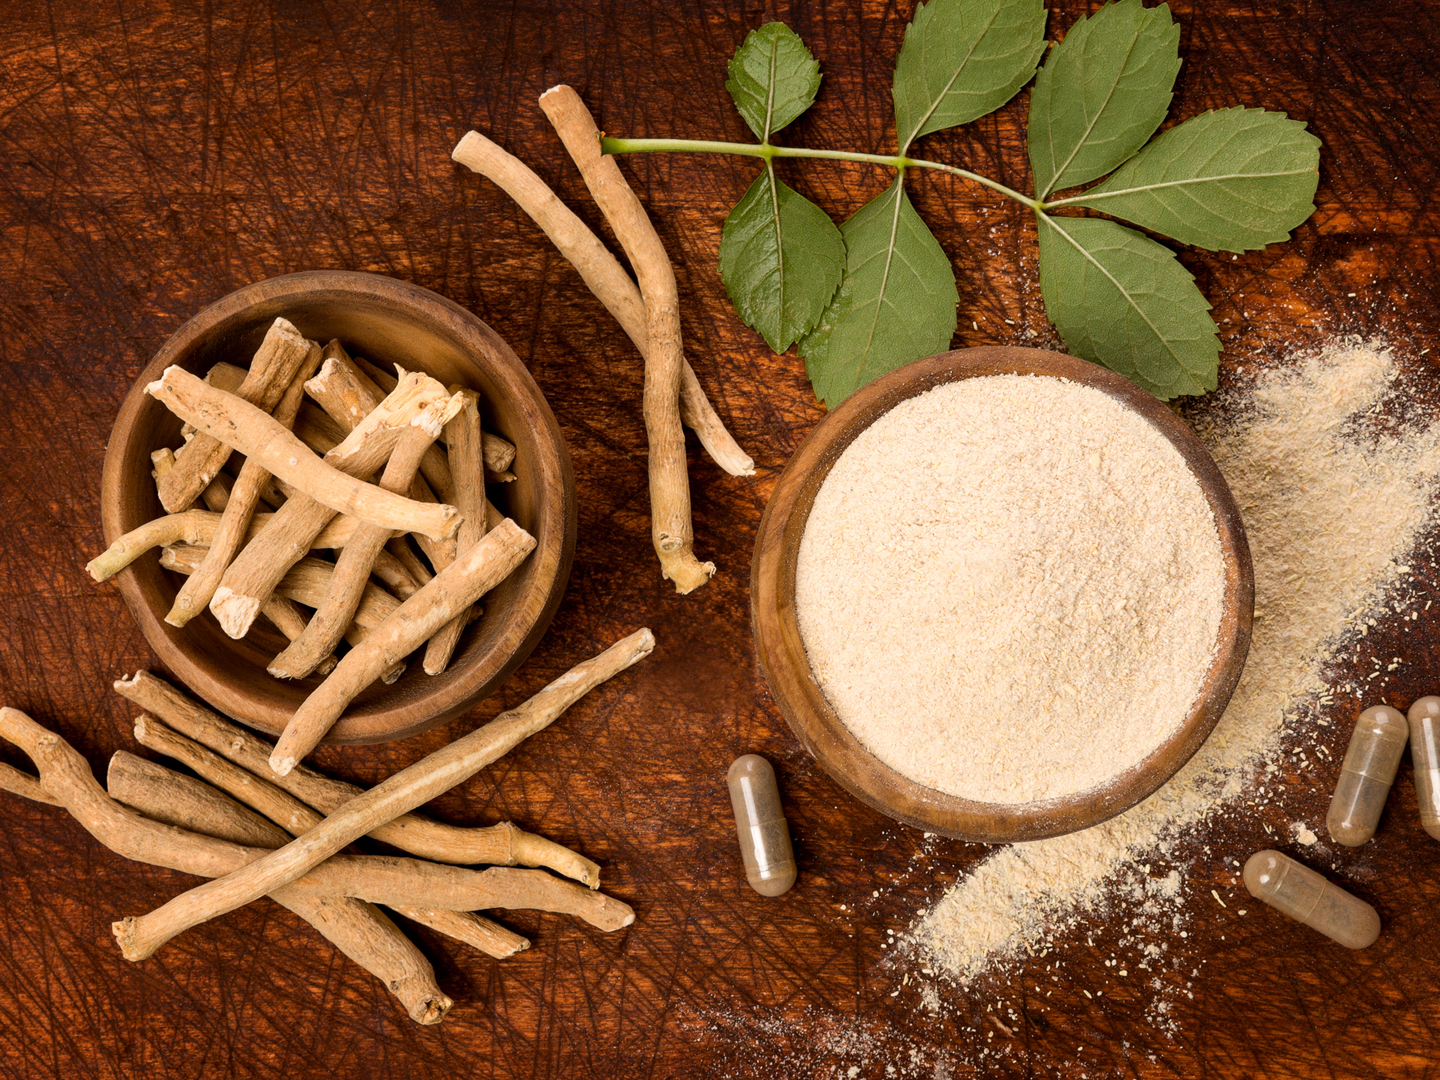 How Ashwagandha Promotes Beauty From the Inside Out